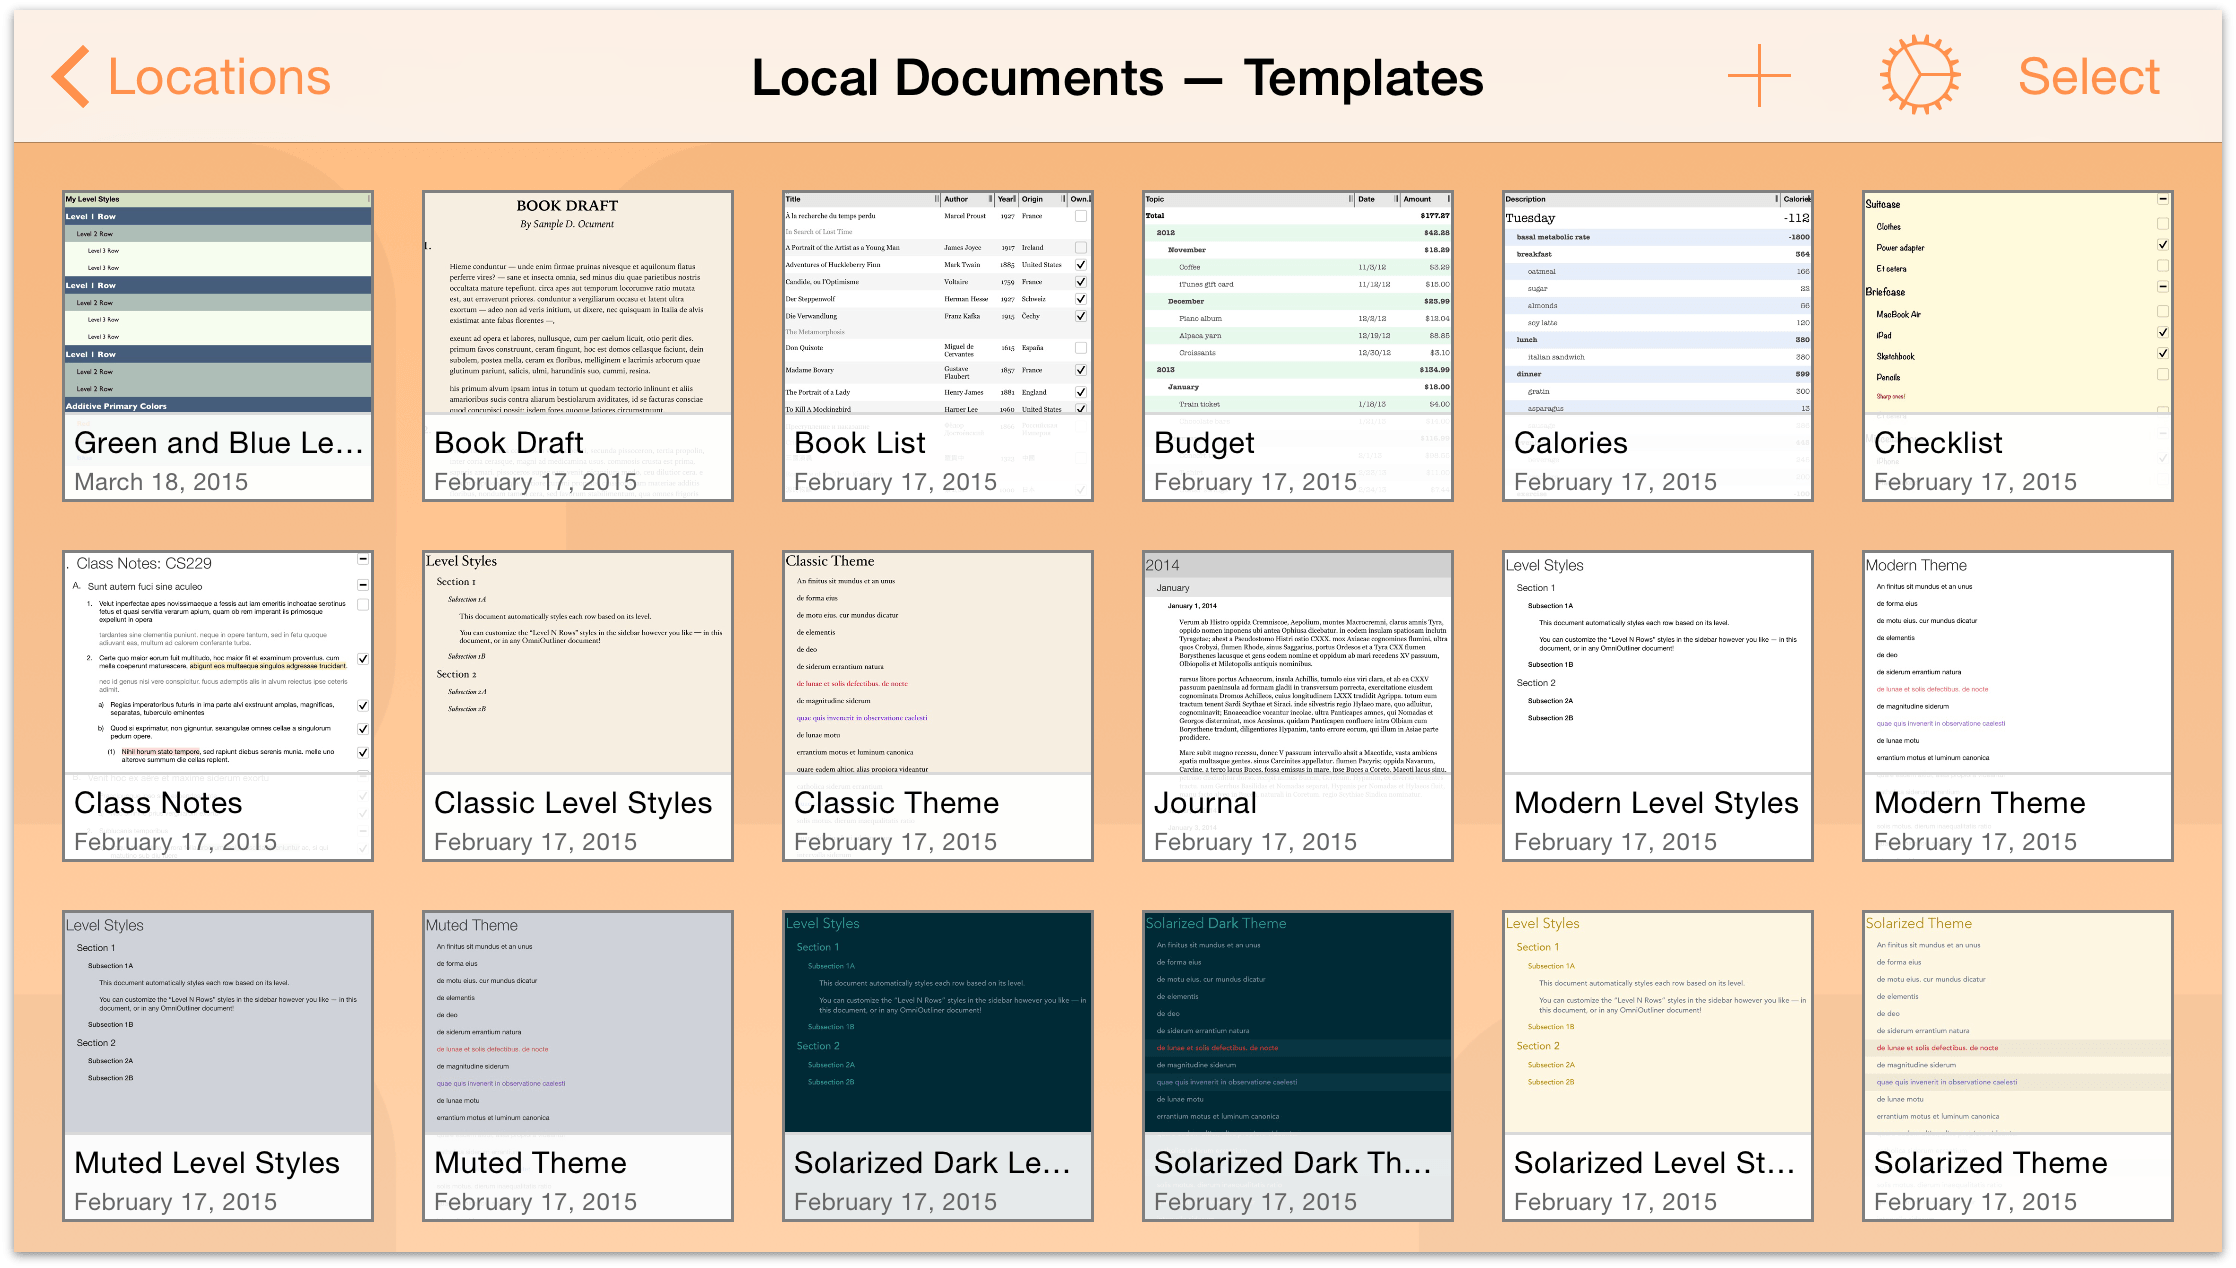 The Local Documents, Templates folder